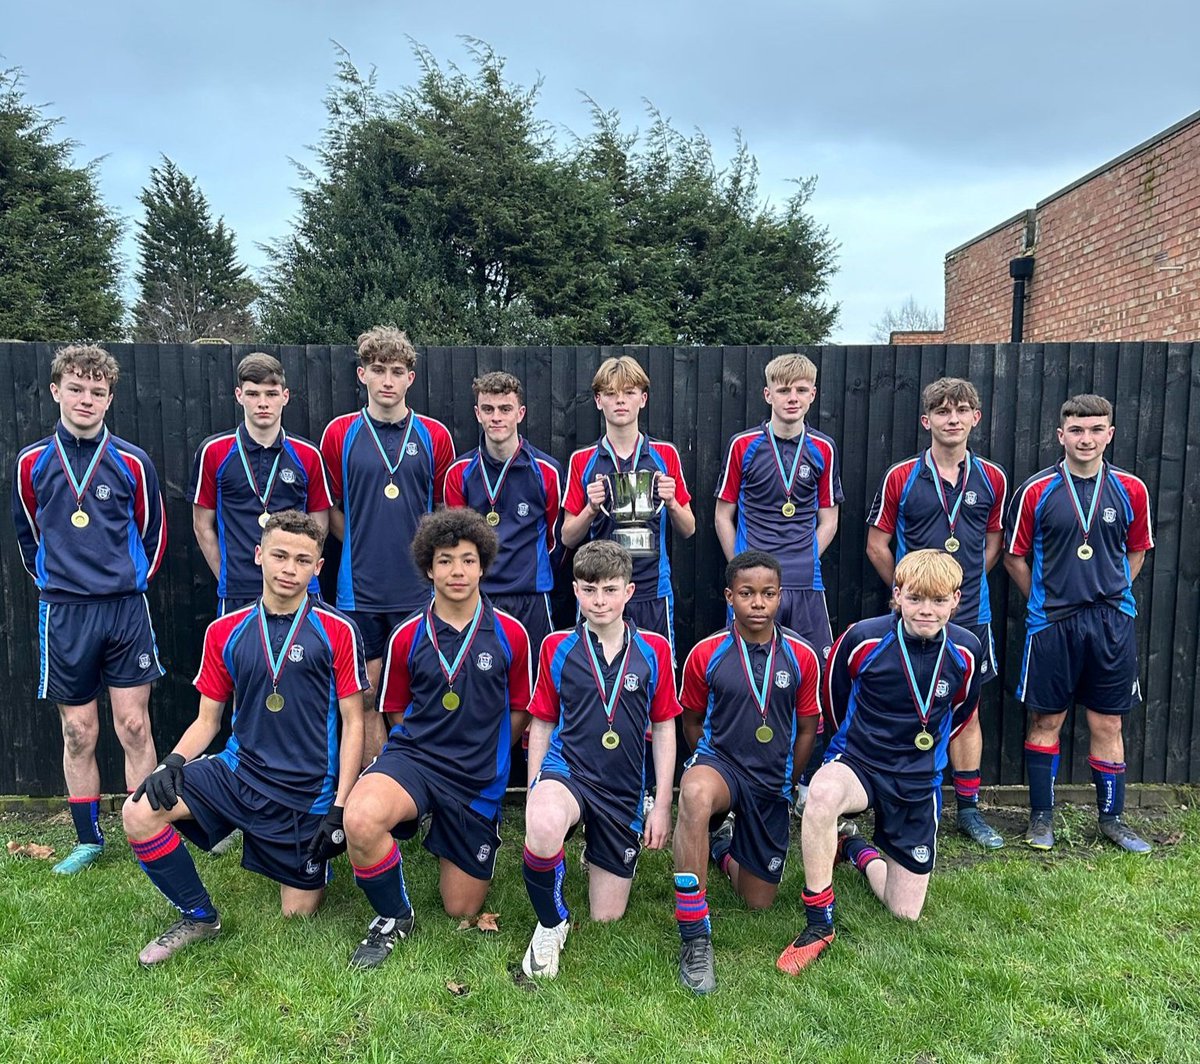 Congratulations to our Year 10 football team who won 4-0 in the District Final this week and will now progress into the Super Cup Final vs Arena Academy 🏆👏🏼